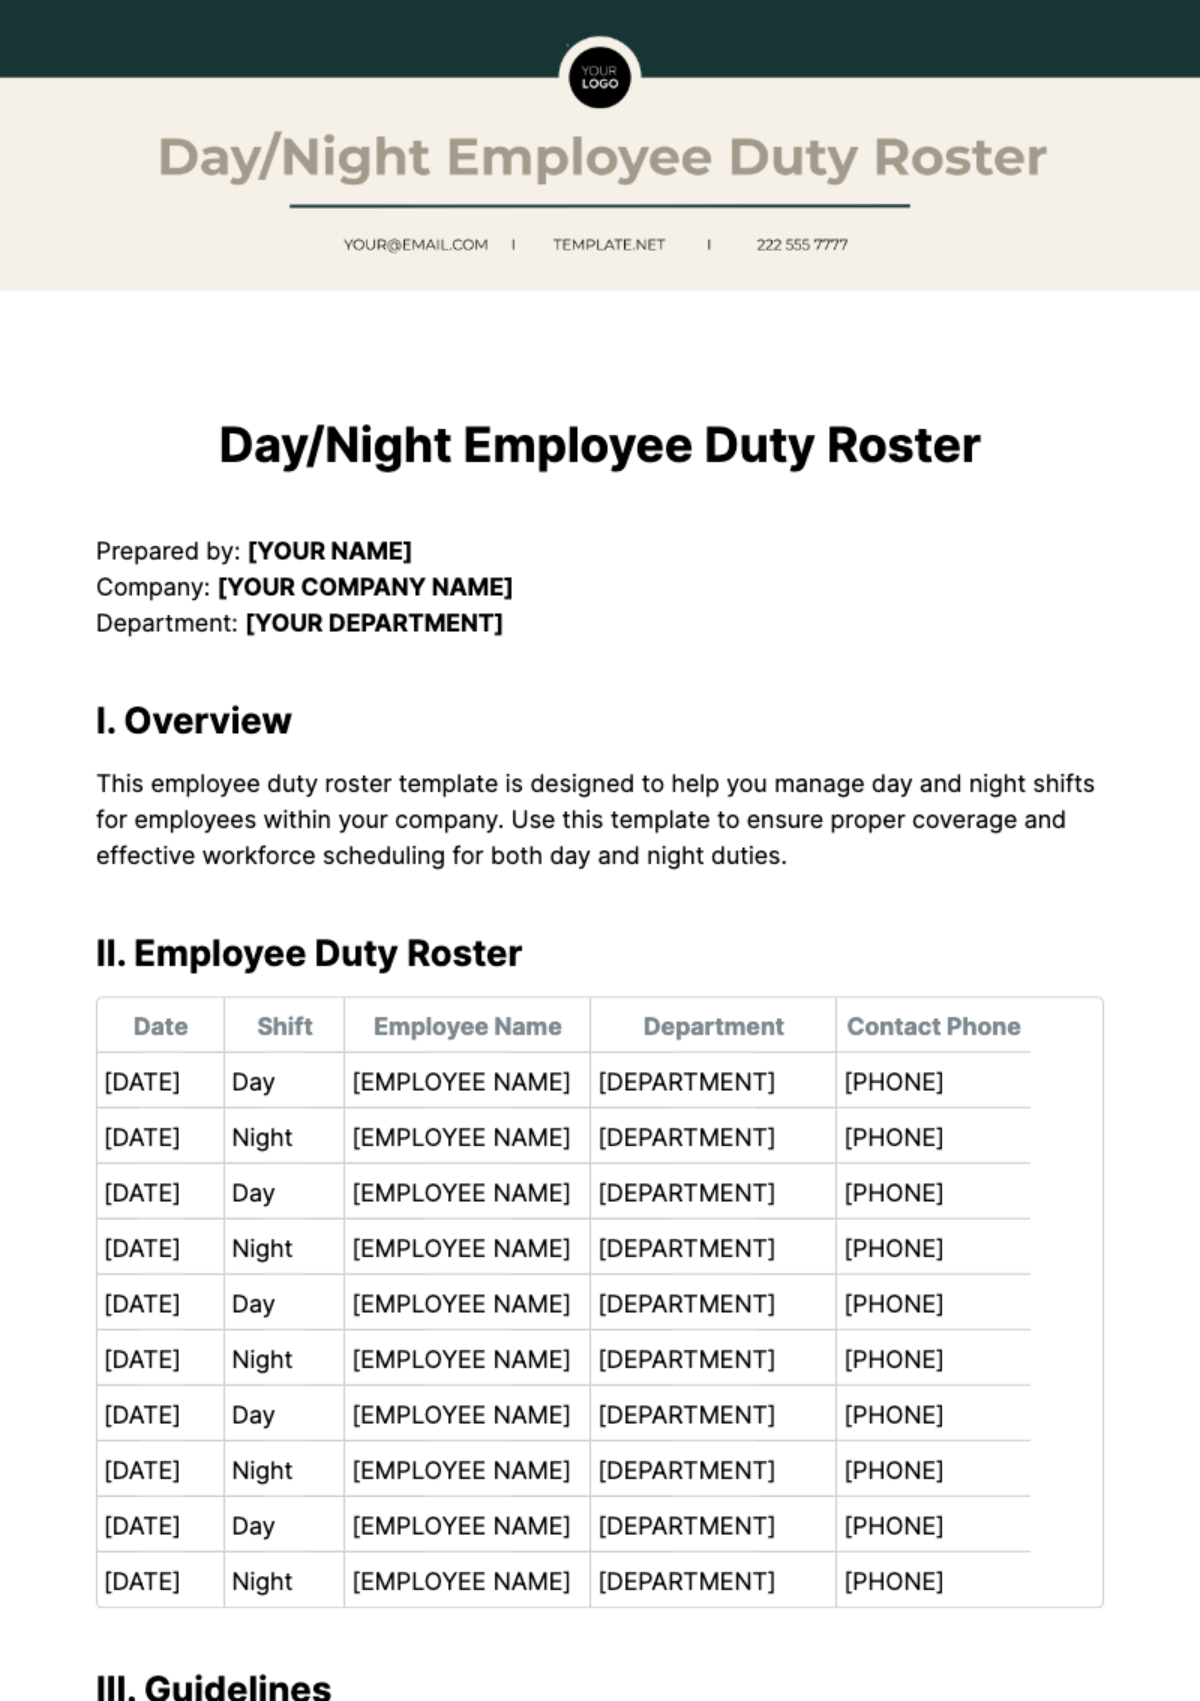 Day/Night Employee Duty Roster Template